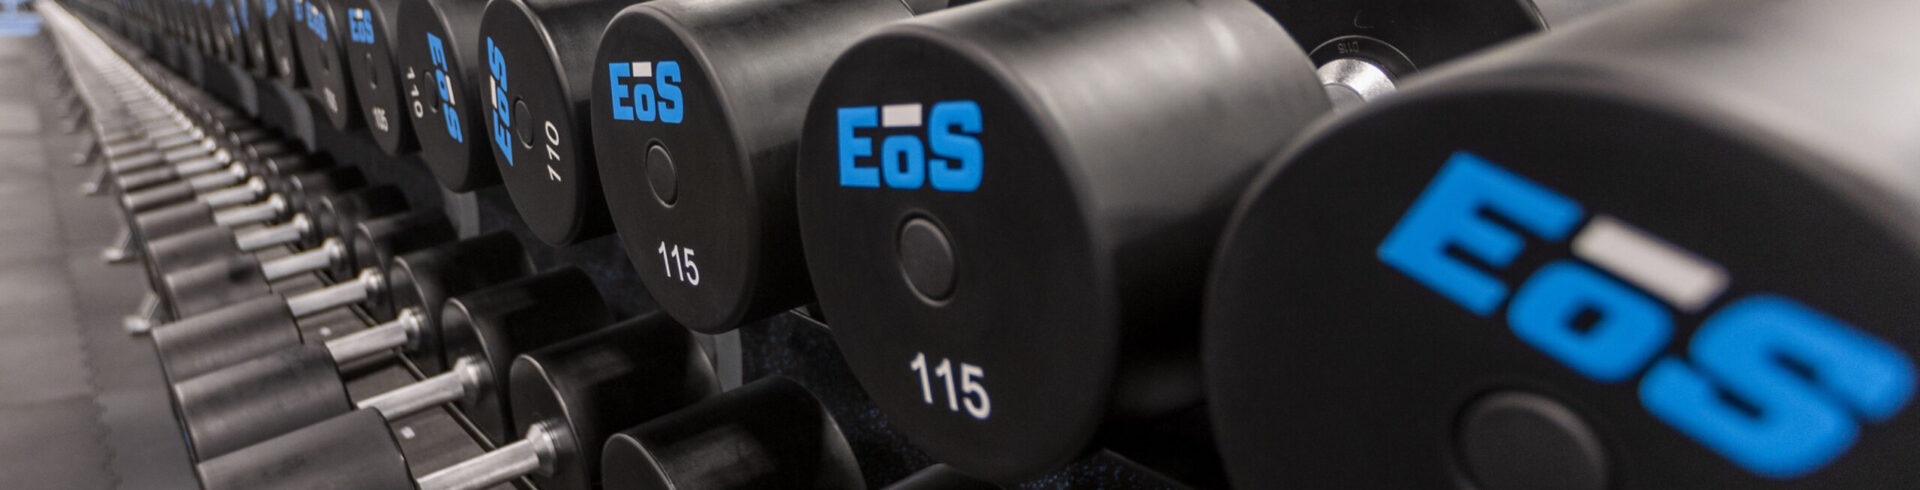 EoS free weights close up